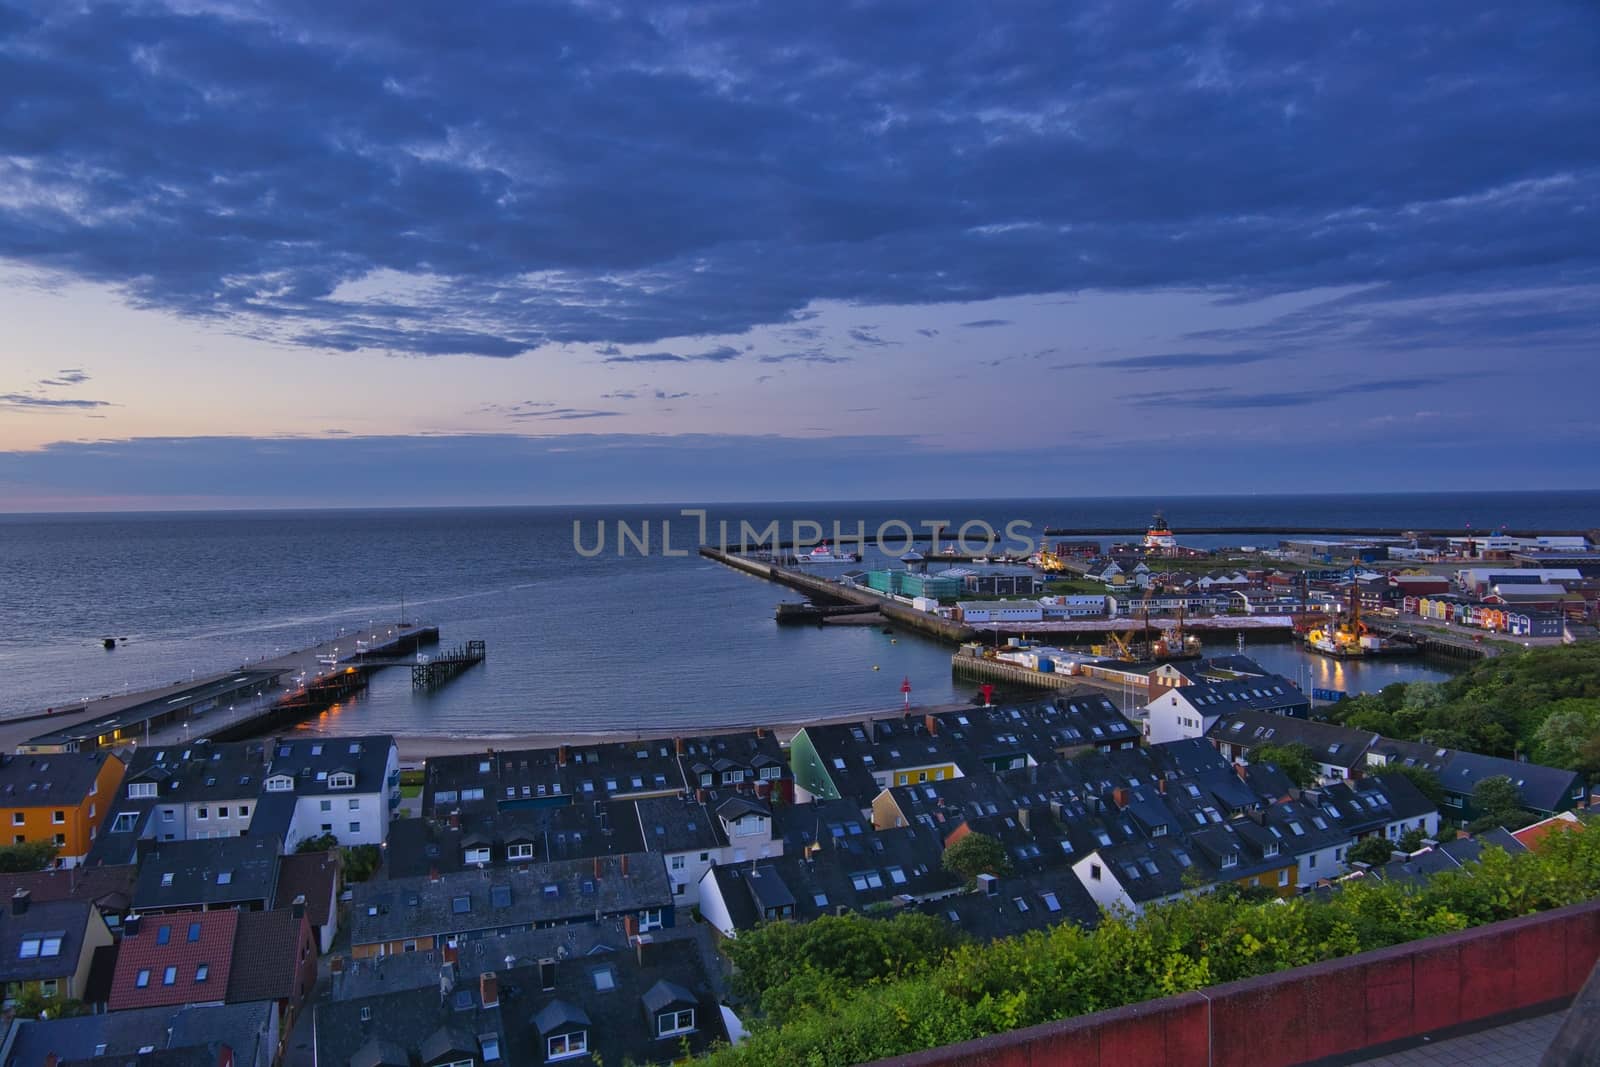 The Harbour of Heligoland in the morning - blue hour